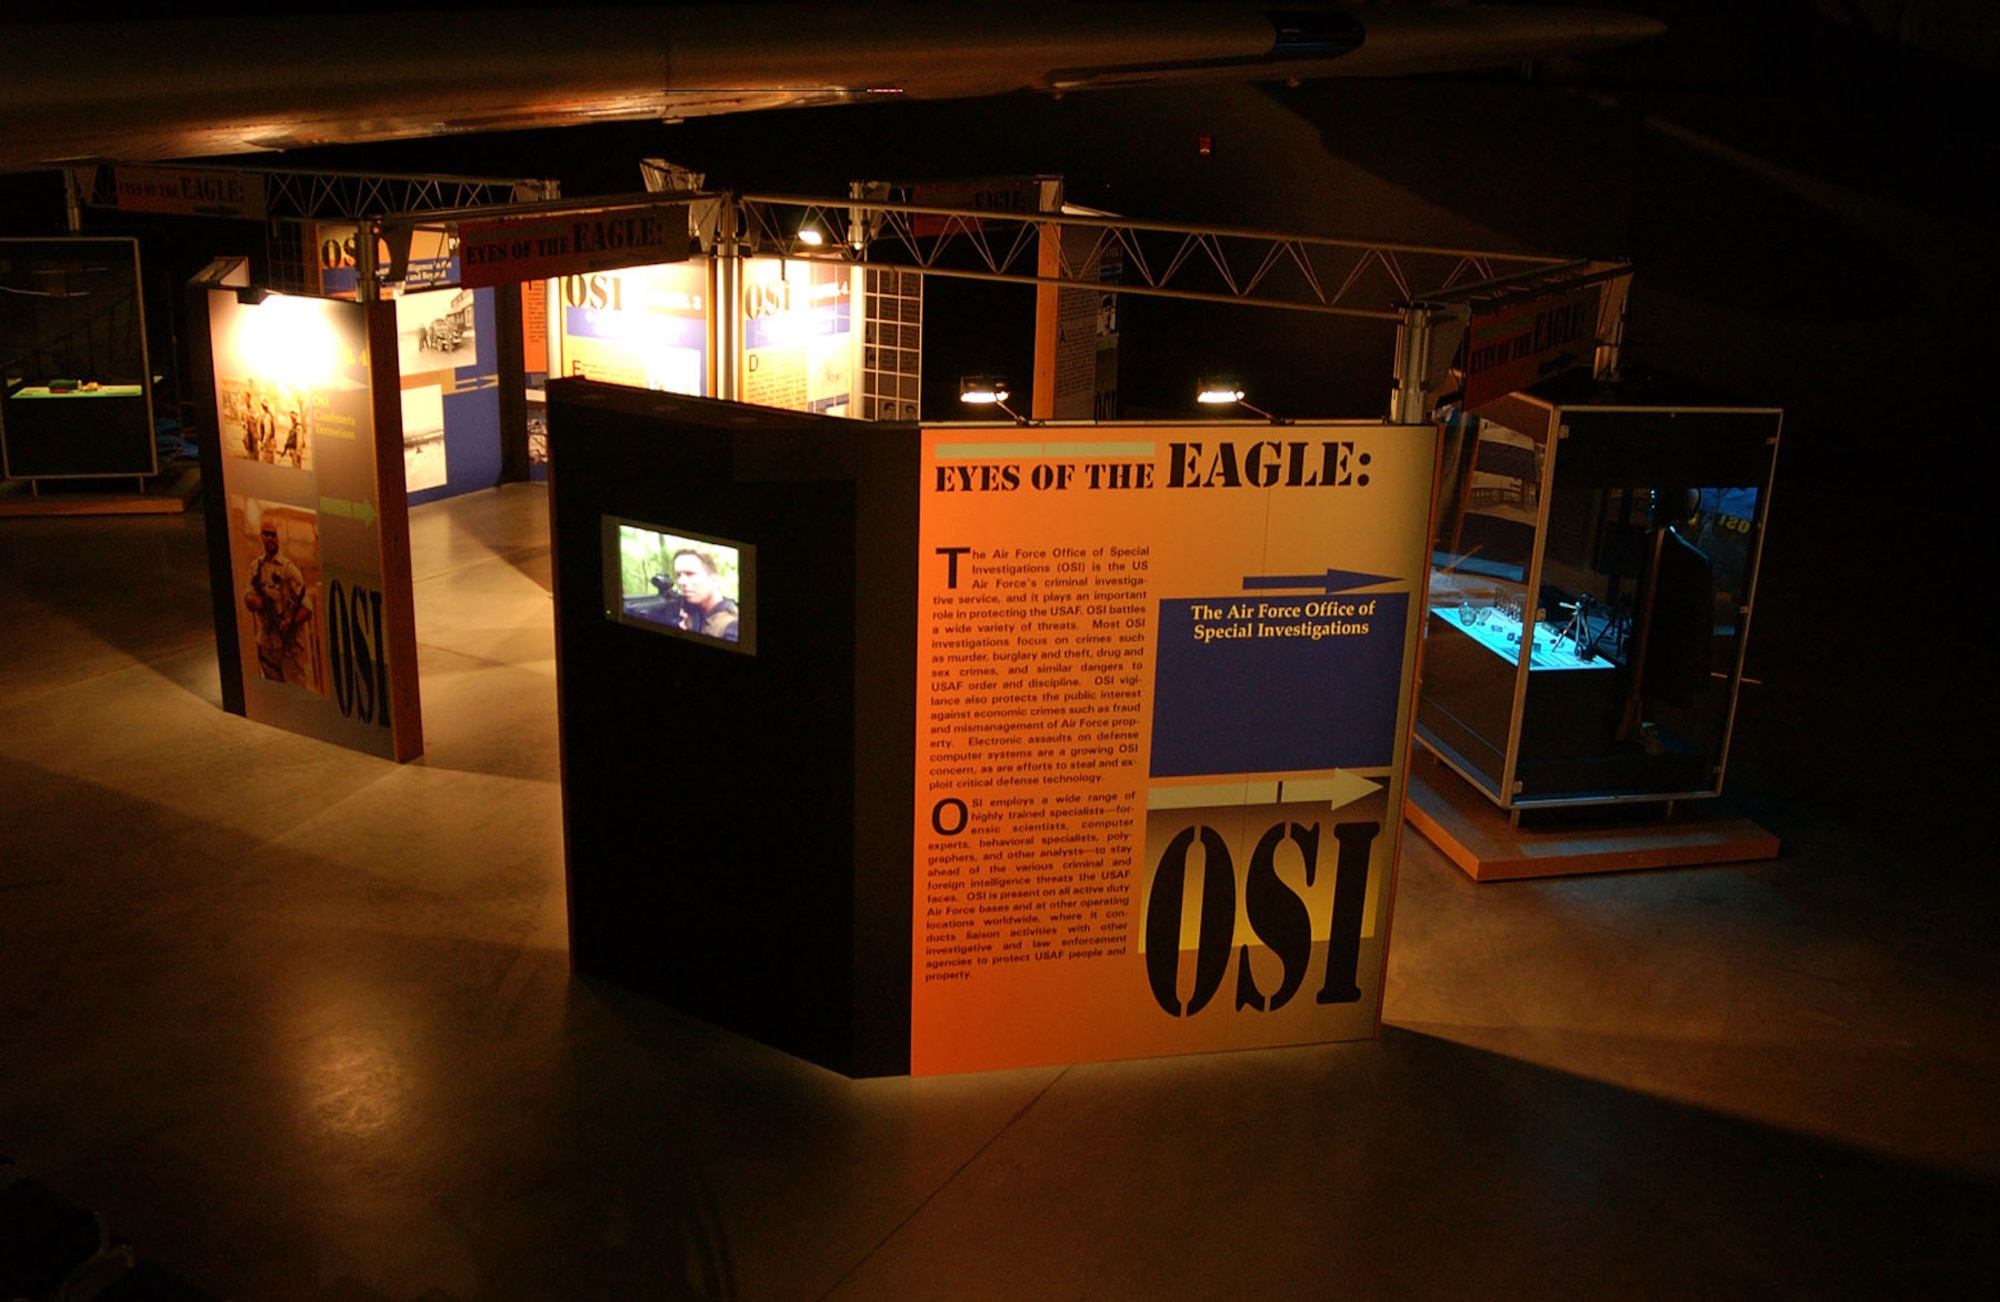 DAYTON, Ohio - The Office of Special Investigations exhibit on display in the Cold War Gallery at the National Museum of the U.S. Air Force. (U.S. Air Force photo)